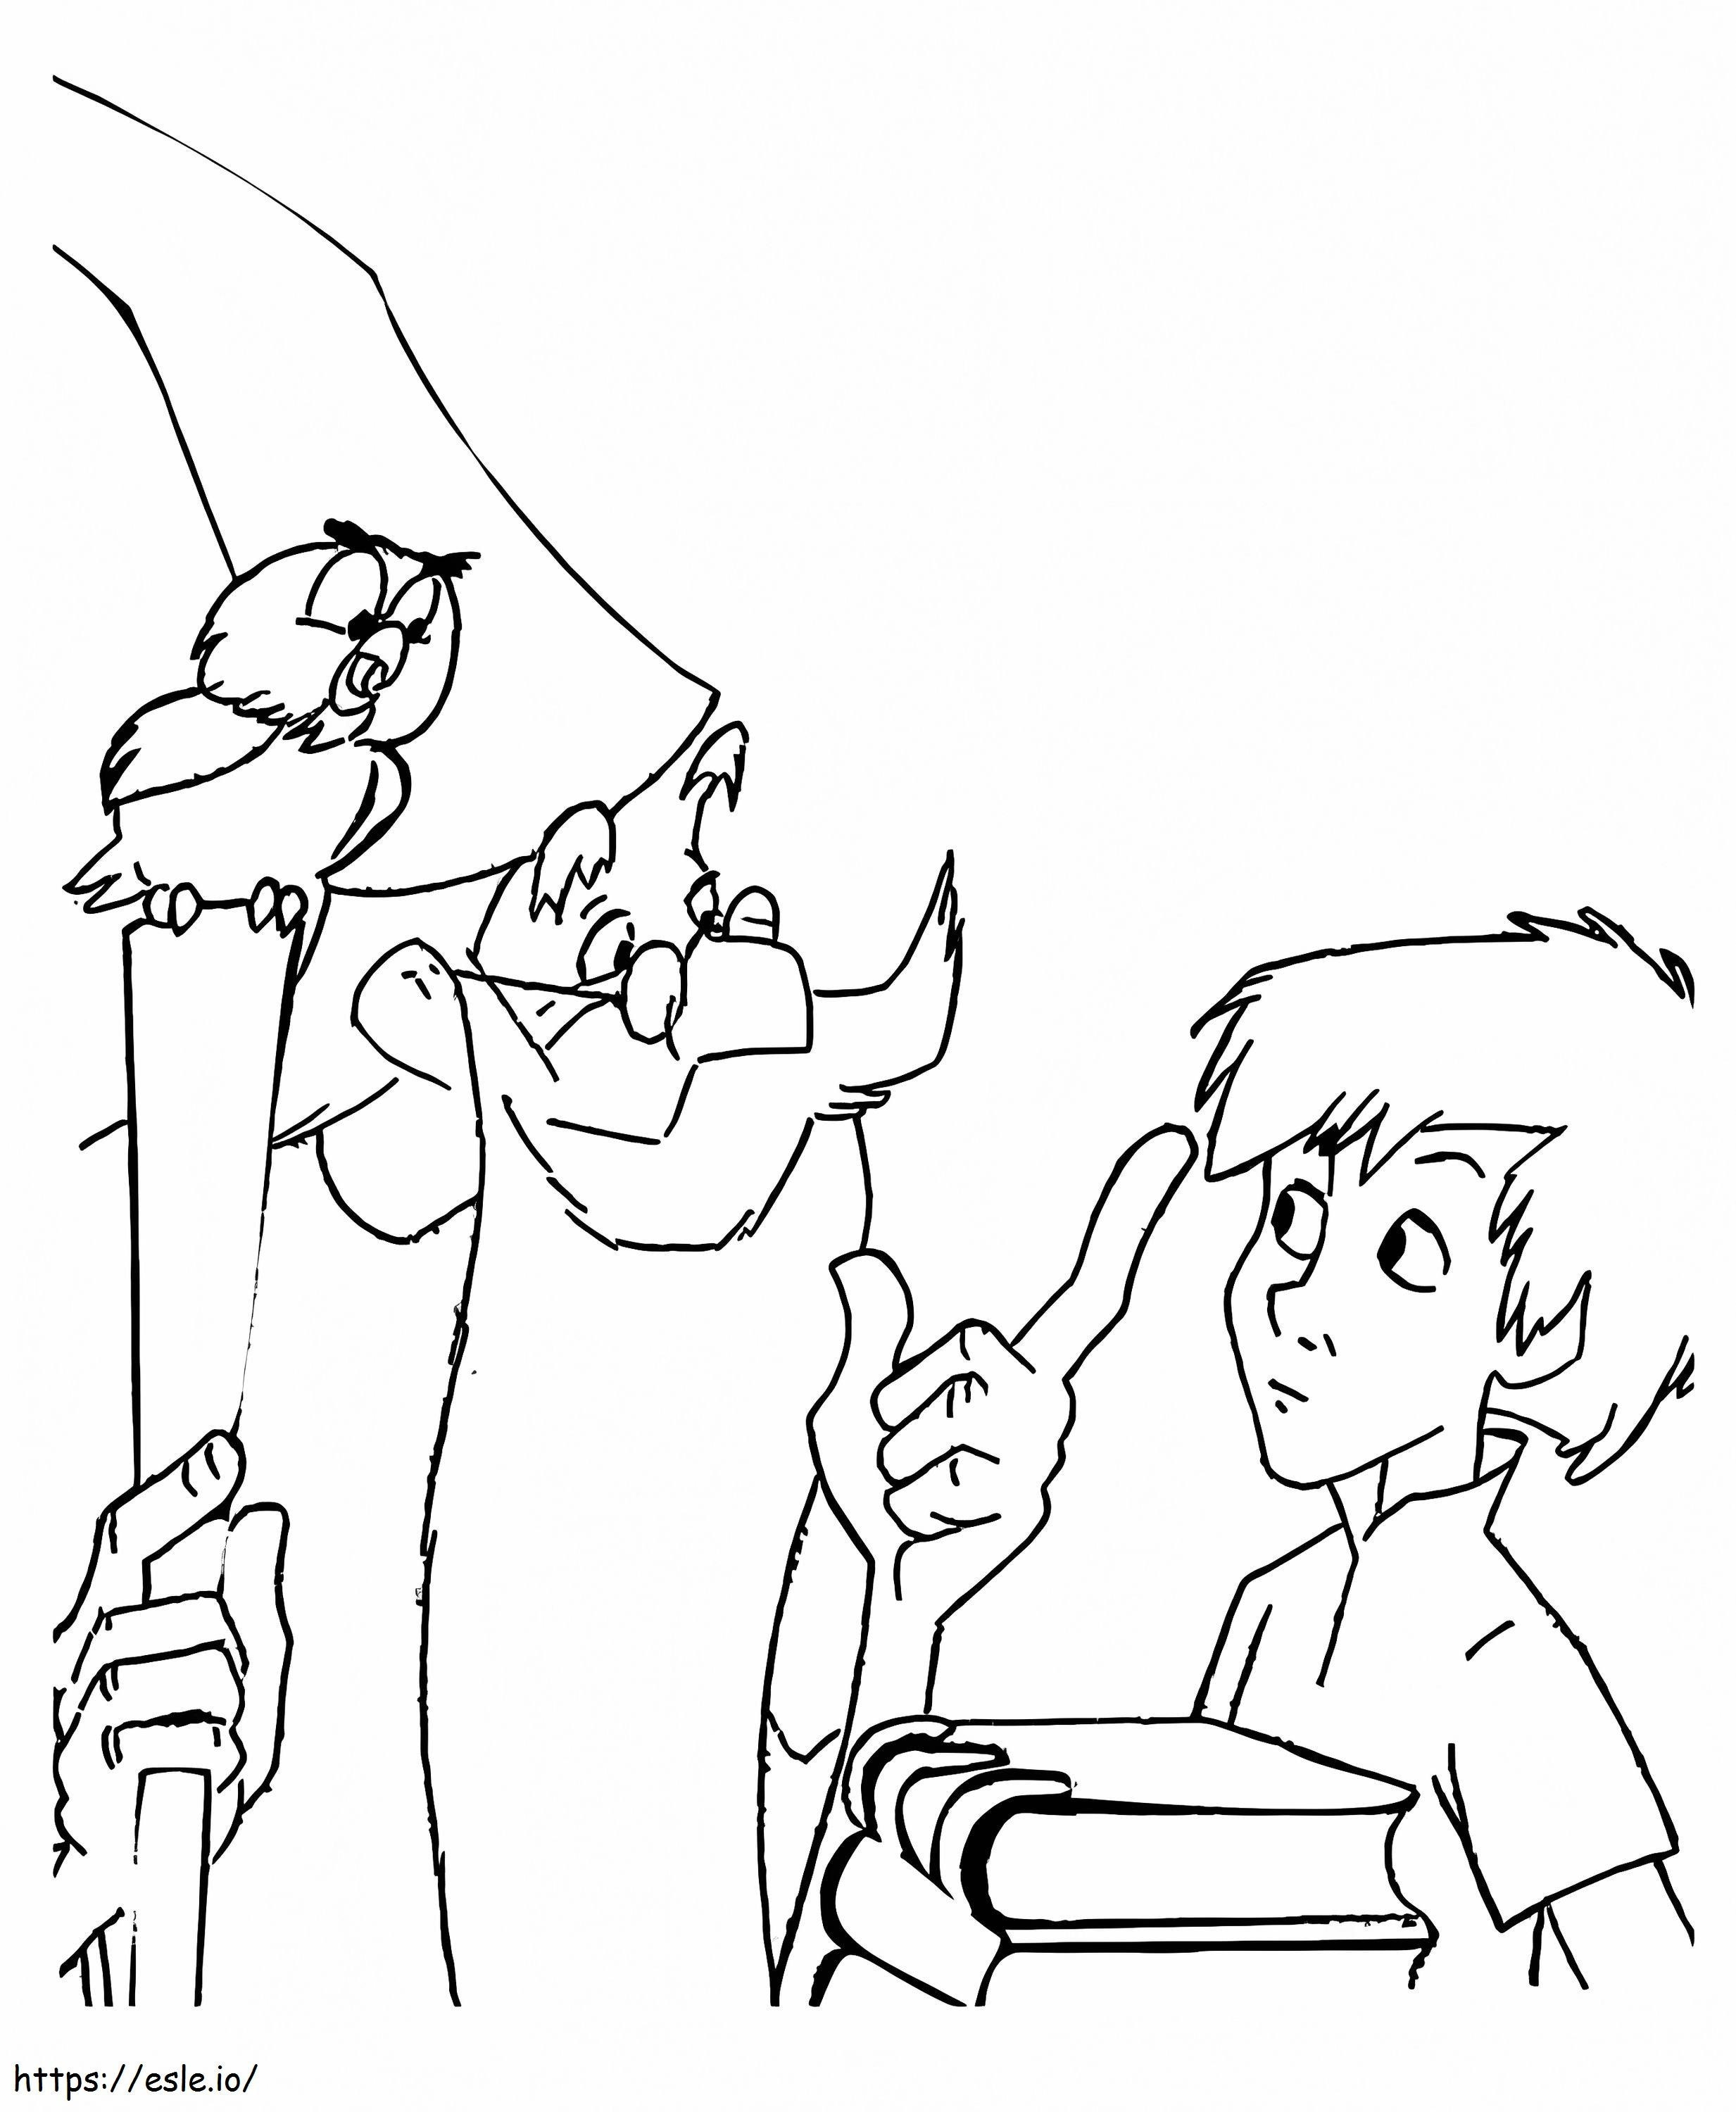 Disney Sword In The Stone coloring page